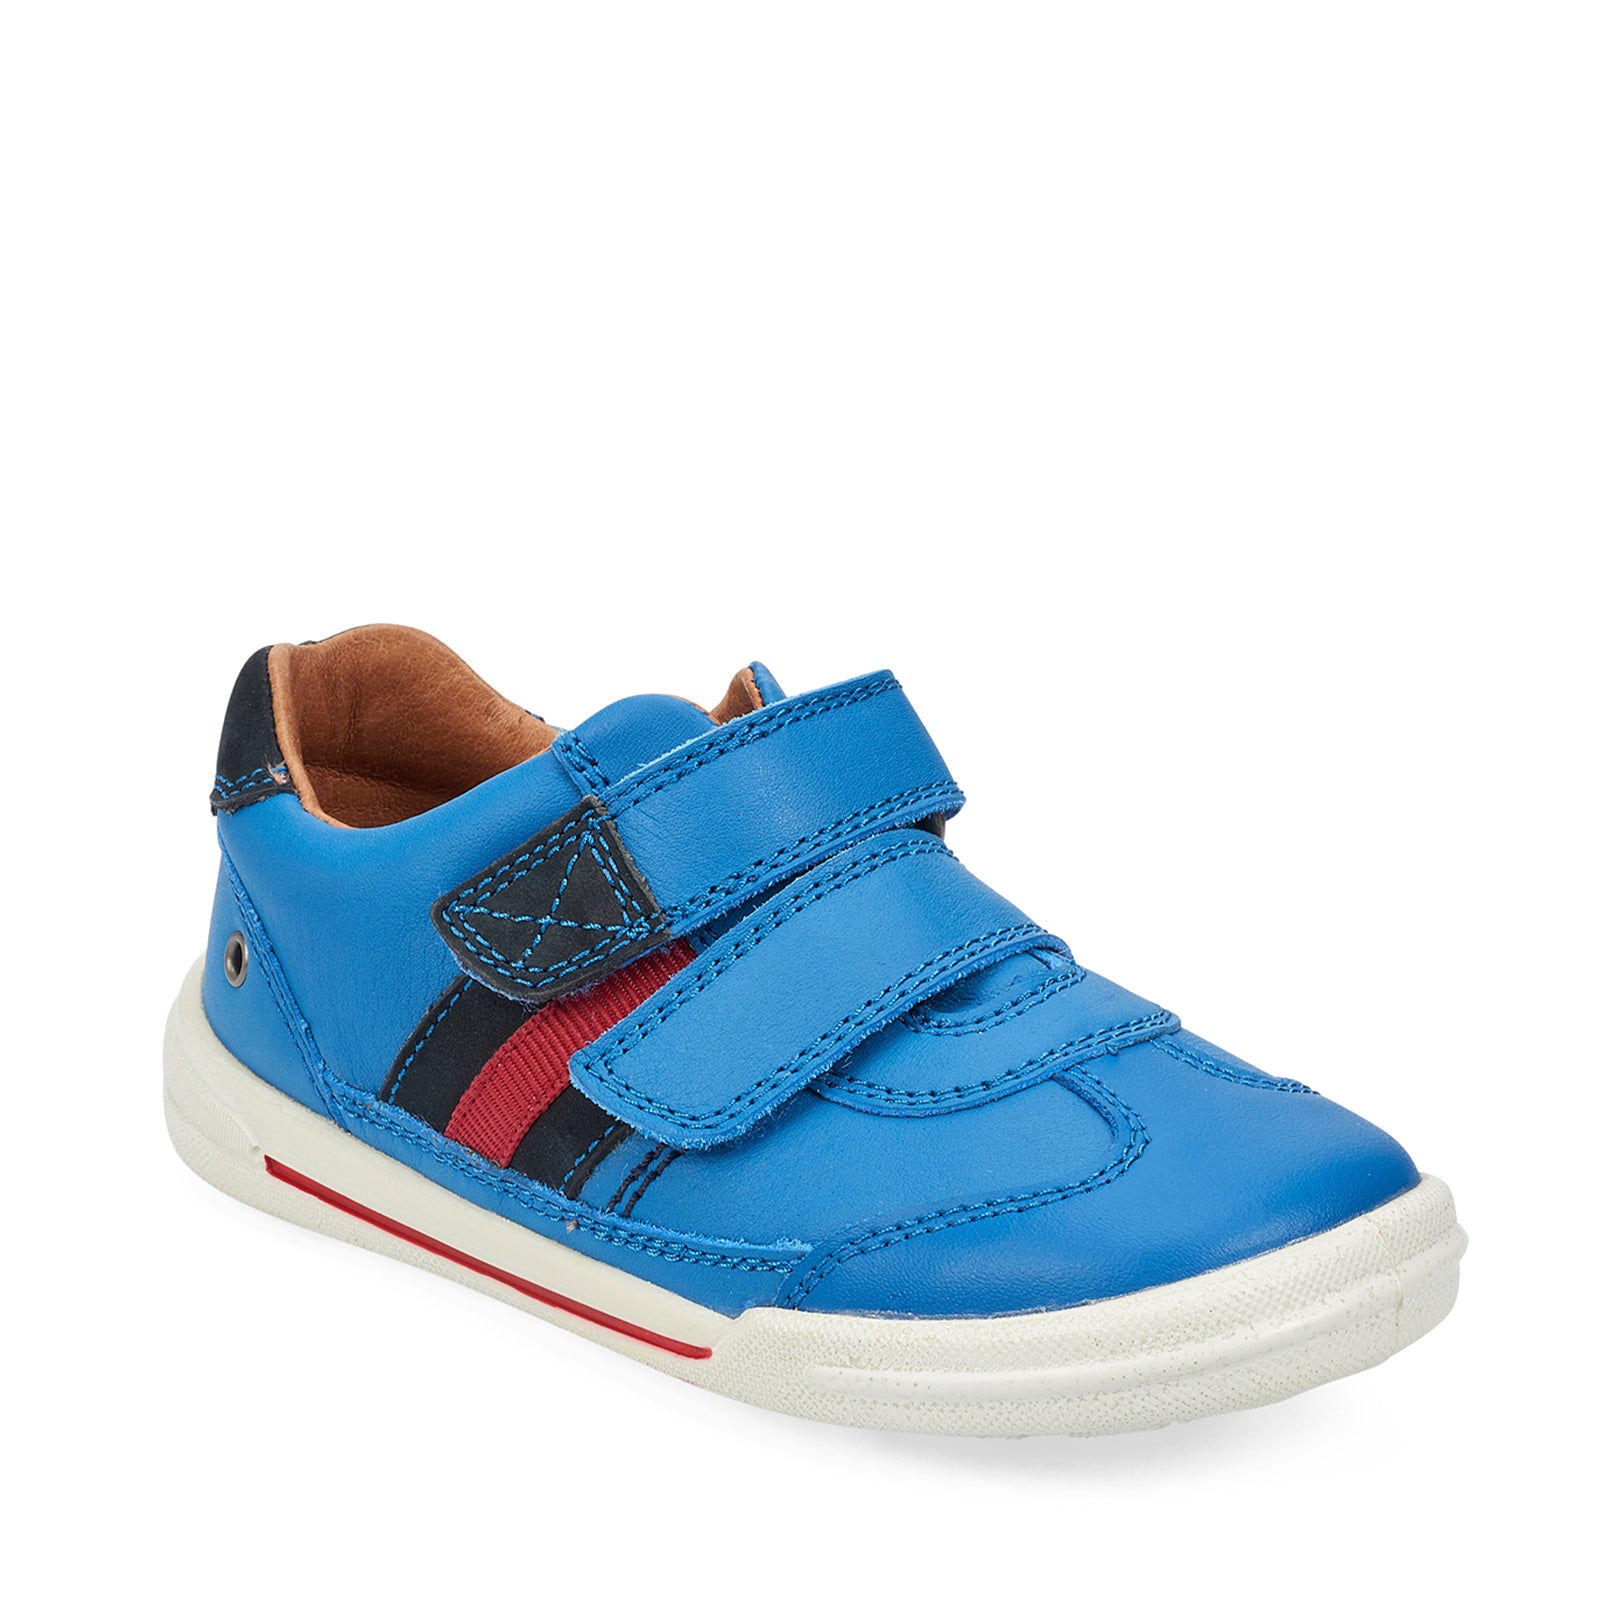 Start-Rite Seesaw 1725_2 Boys Blue Leather Touch Fastening Shoe